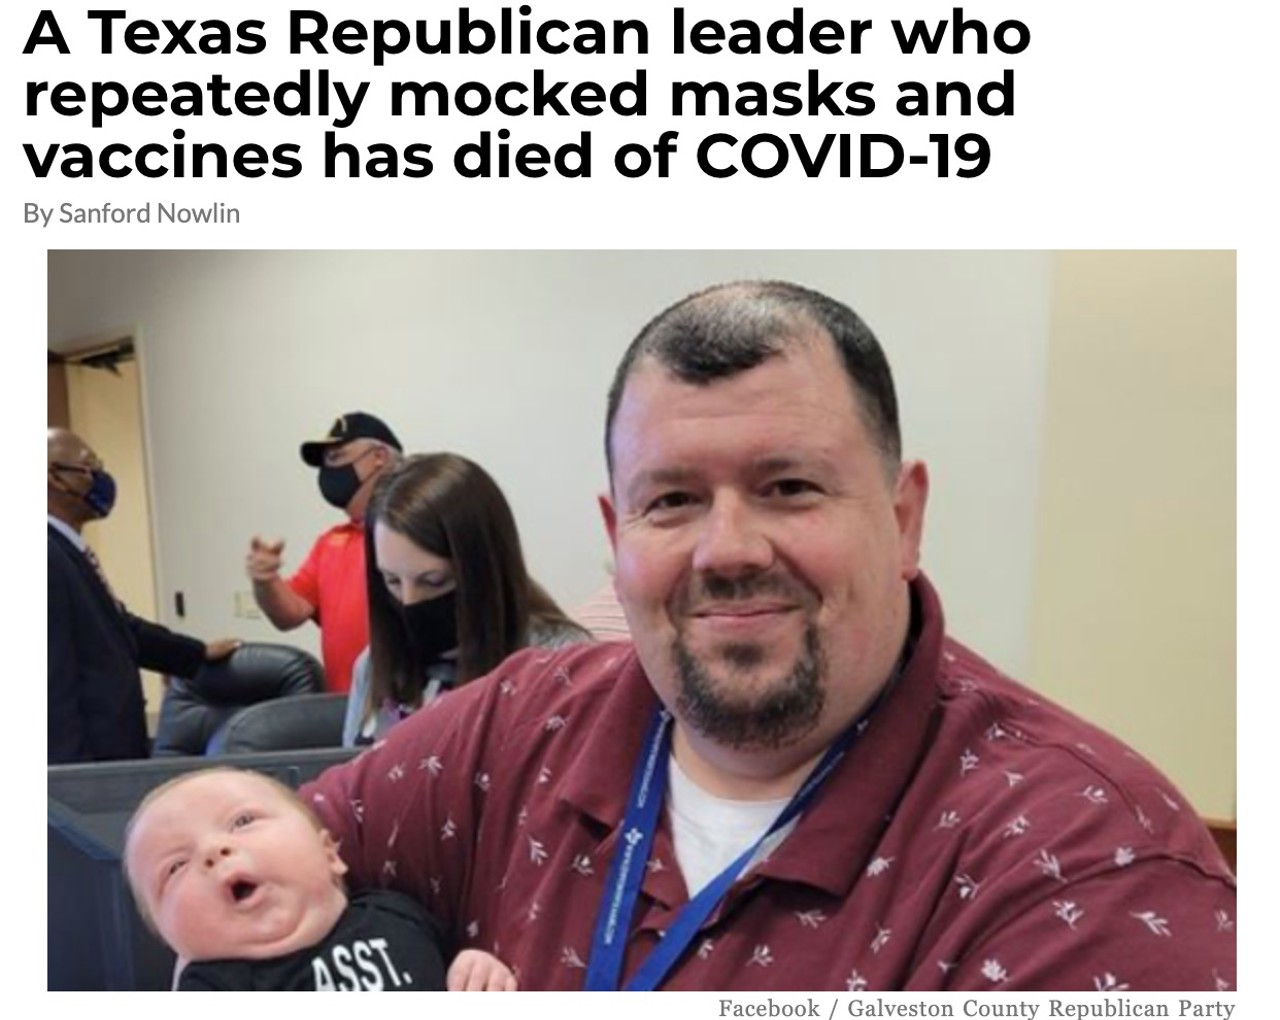 9. A Texas Republican leader who repeatedly mocked masks and vaccines has died of COVID-19